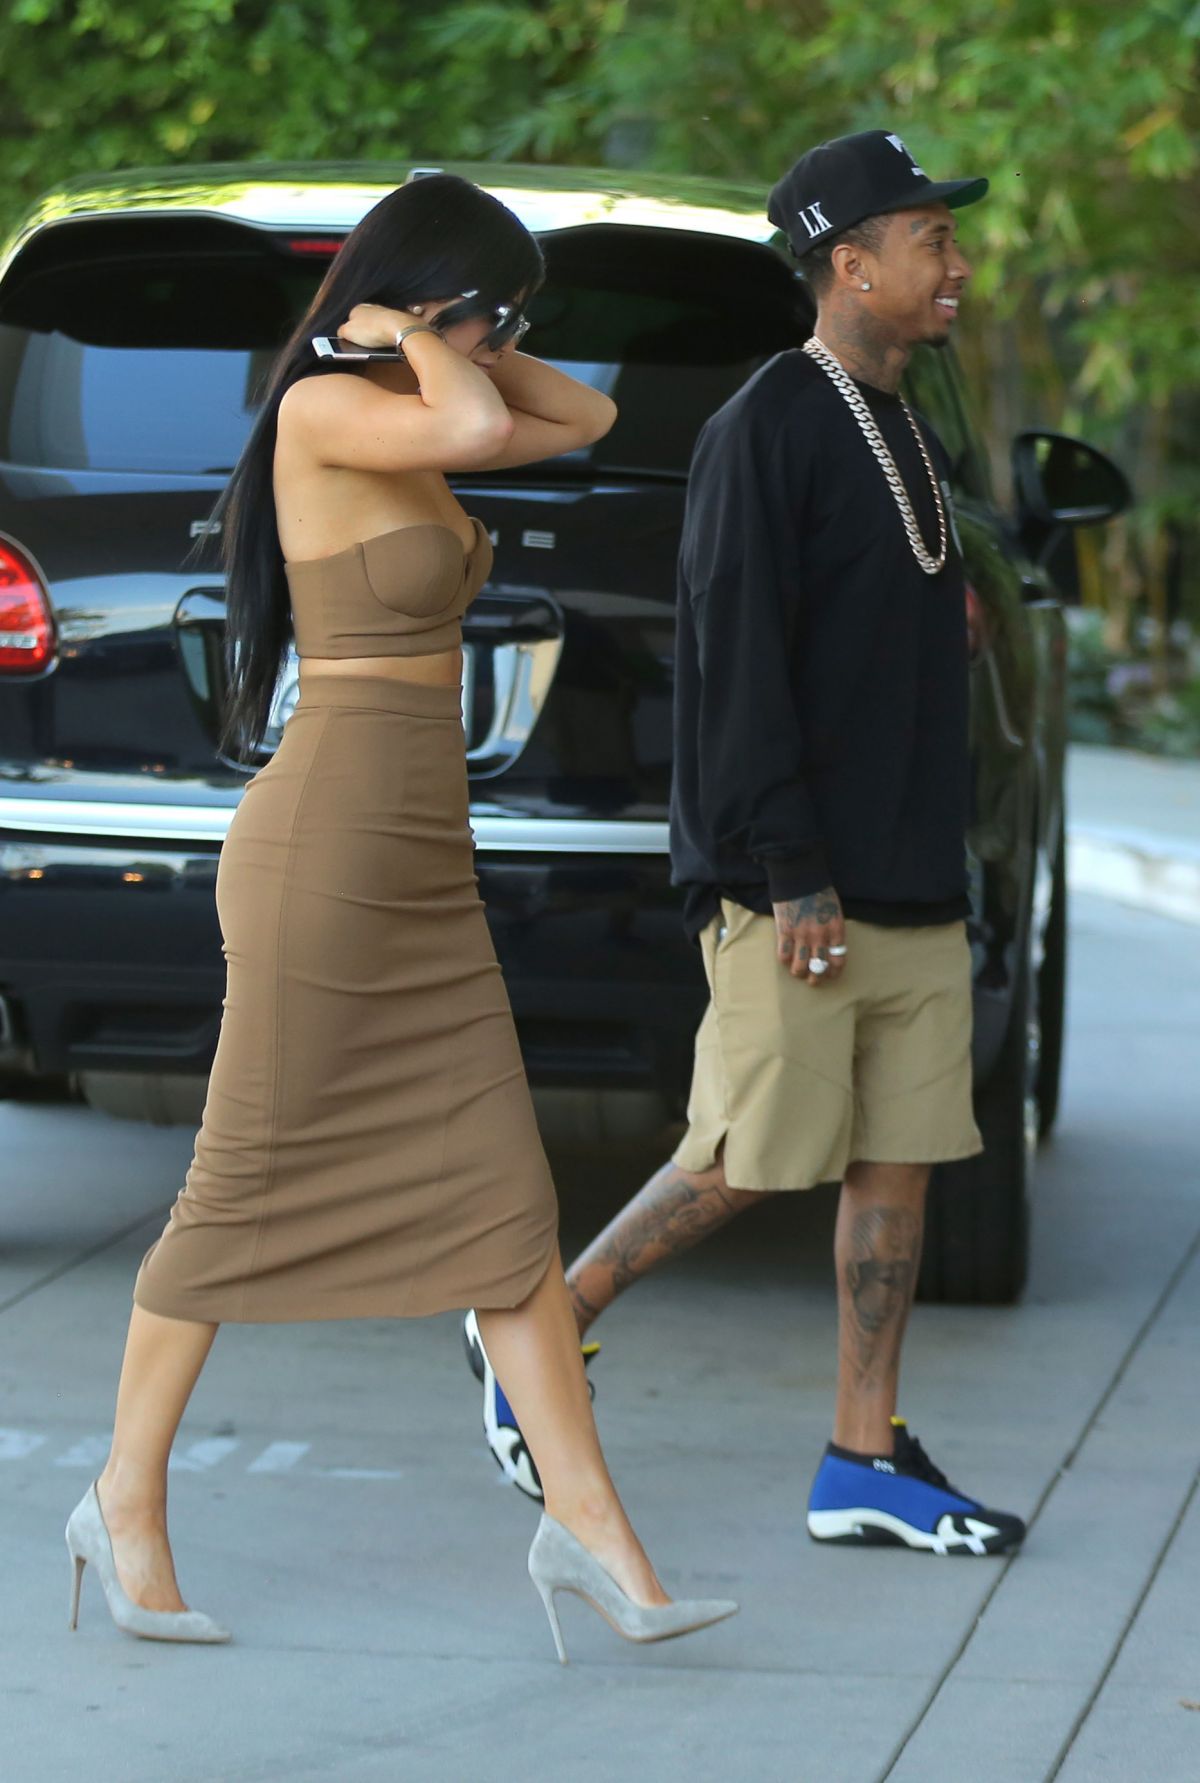 kylie-jenner-out-and-about-in-woodland-hills-10-13-2015_7.jpg